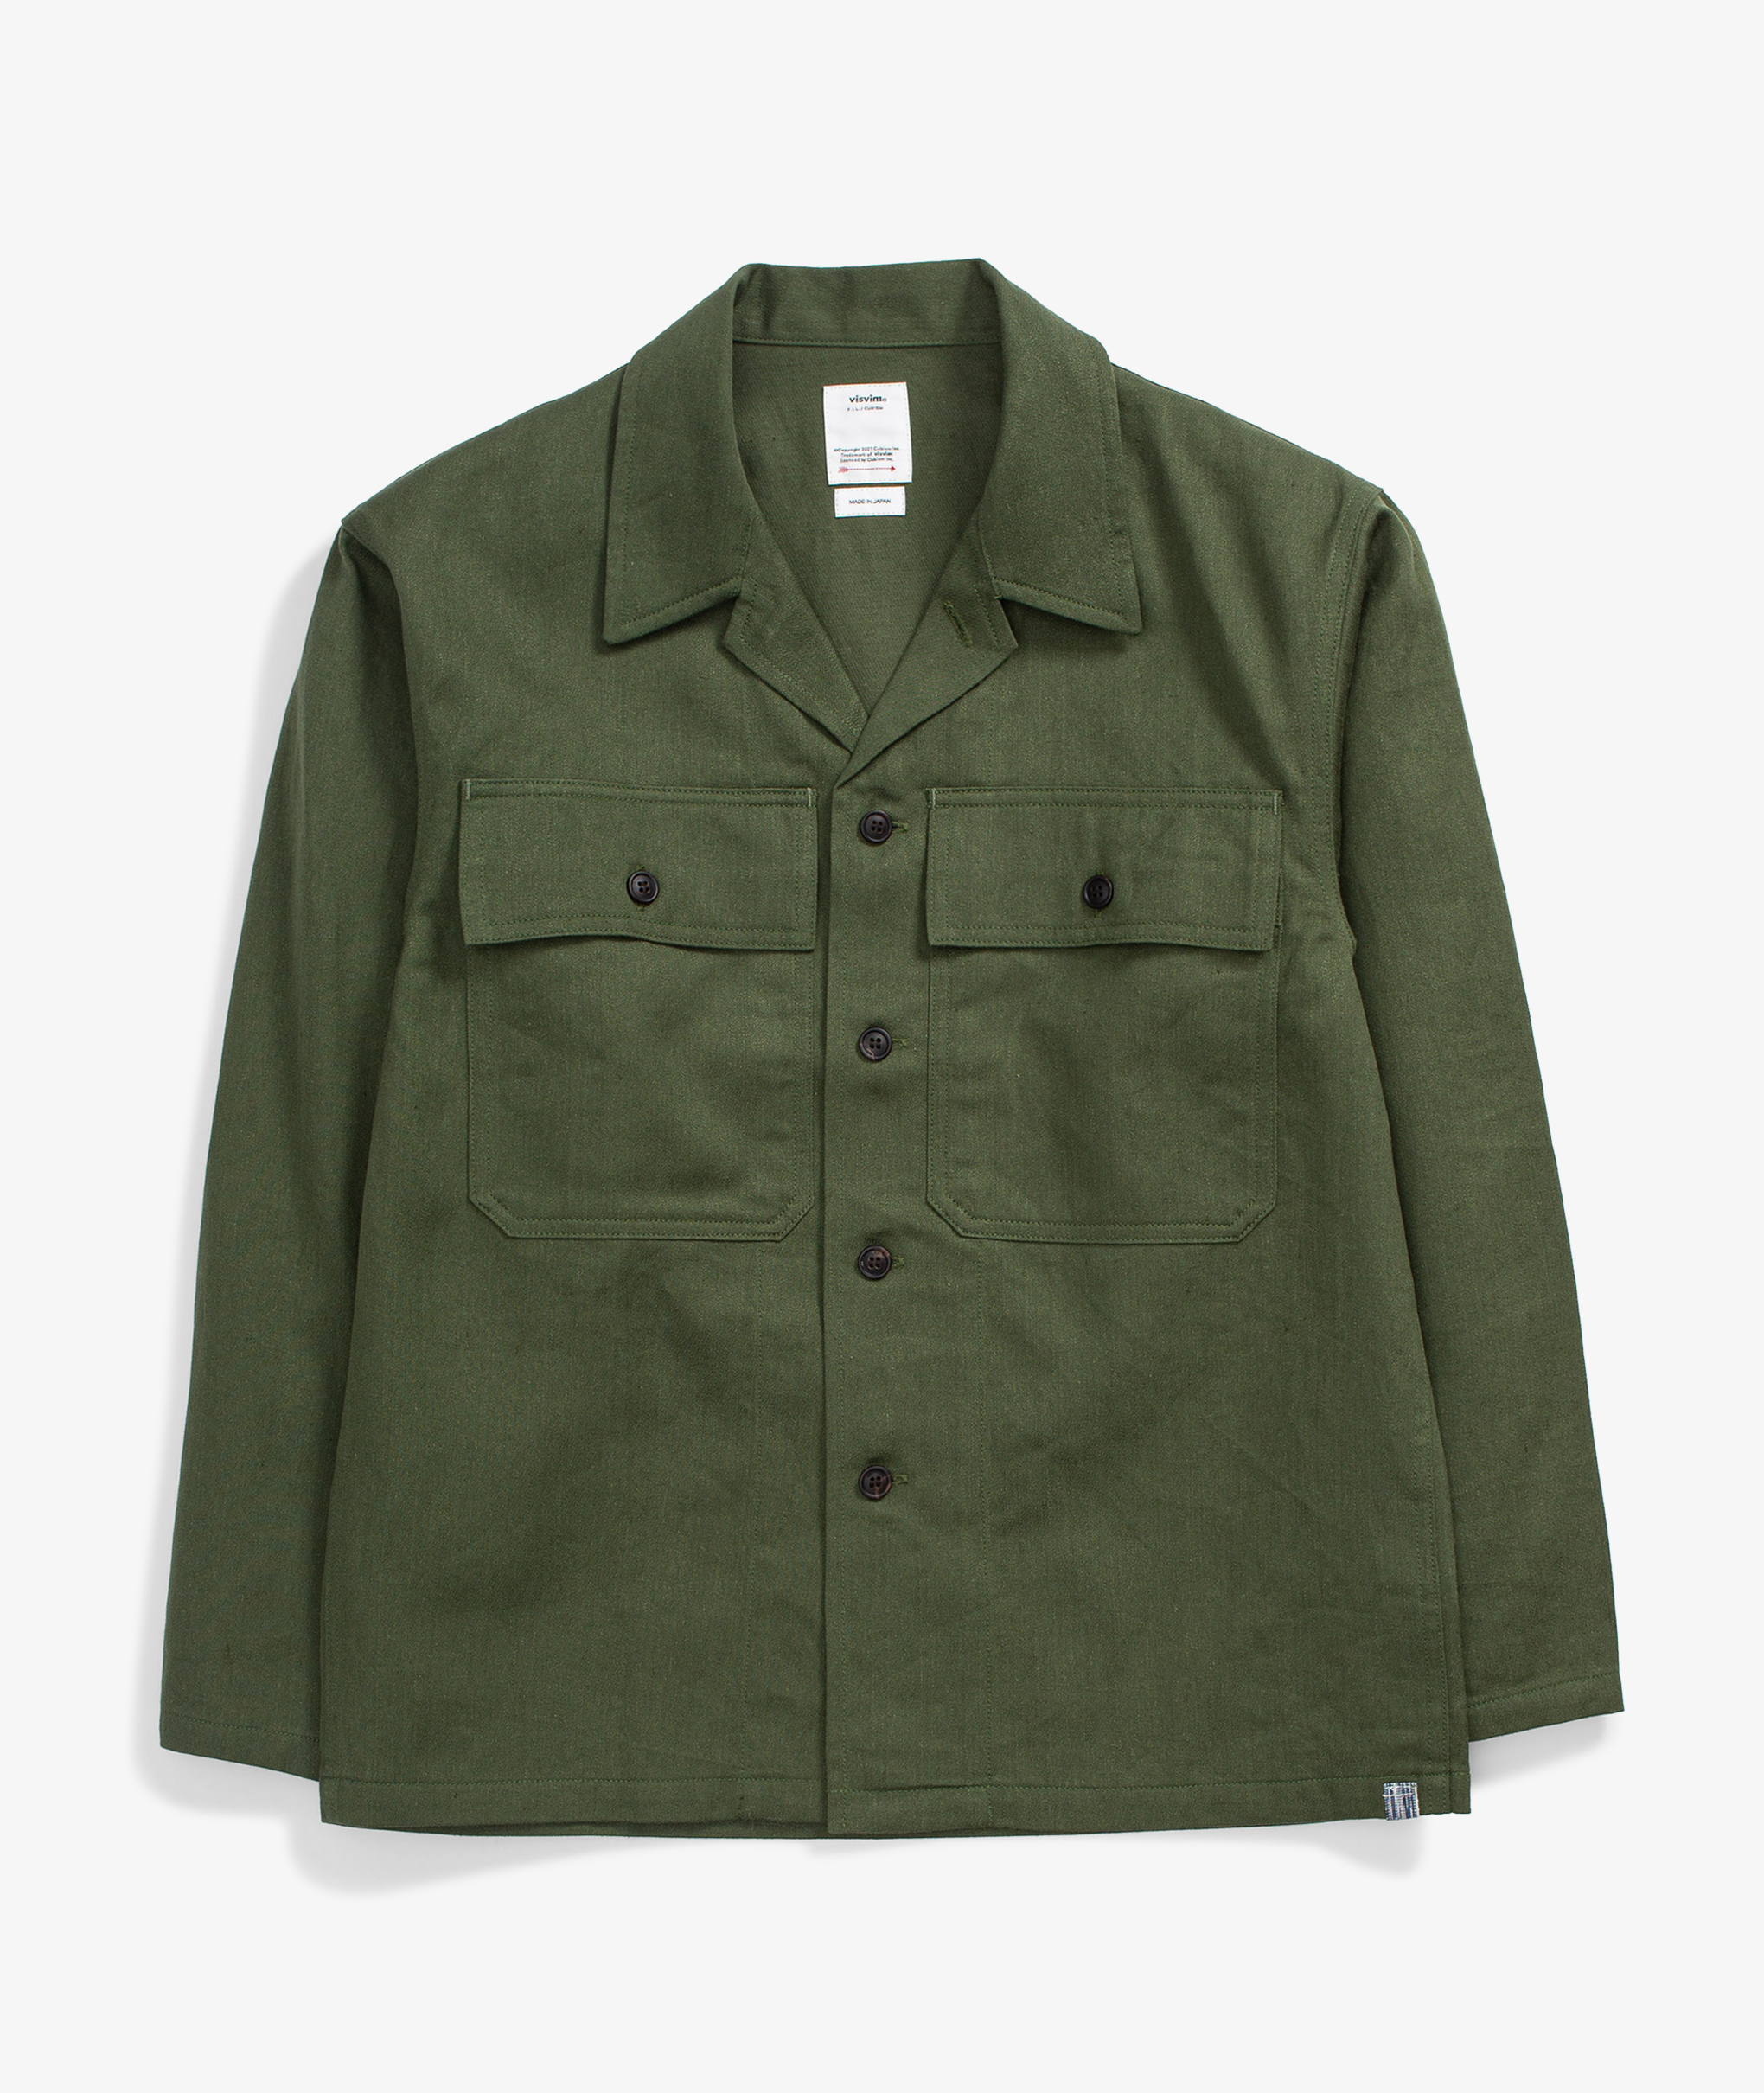 Norse Store | Shipping Worldwide - Visvim Cardwell Shirt L/S - Olive